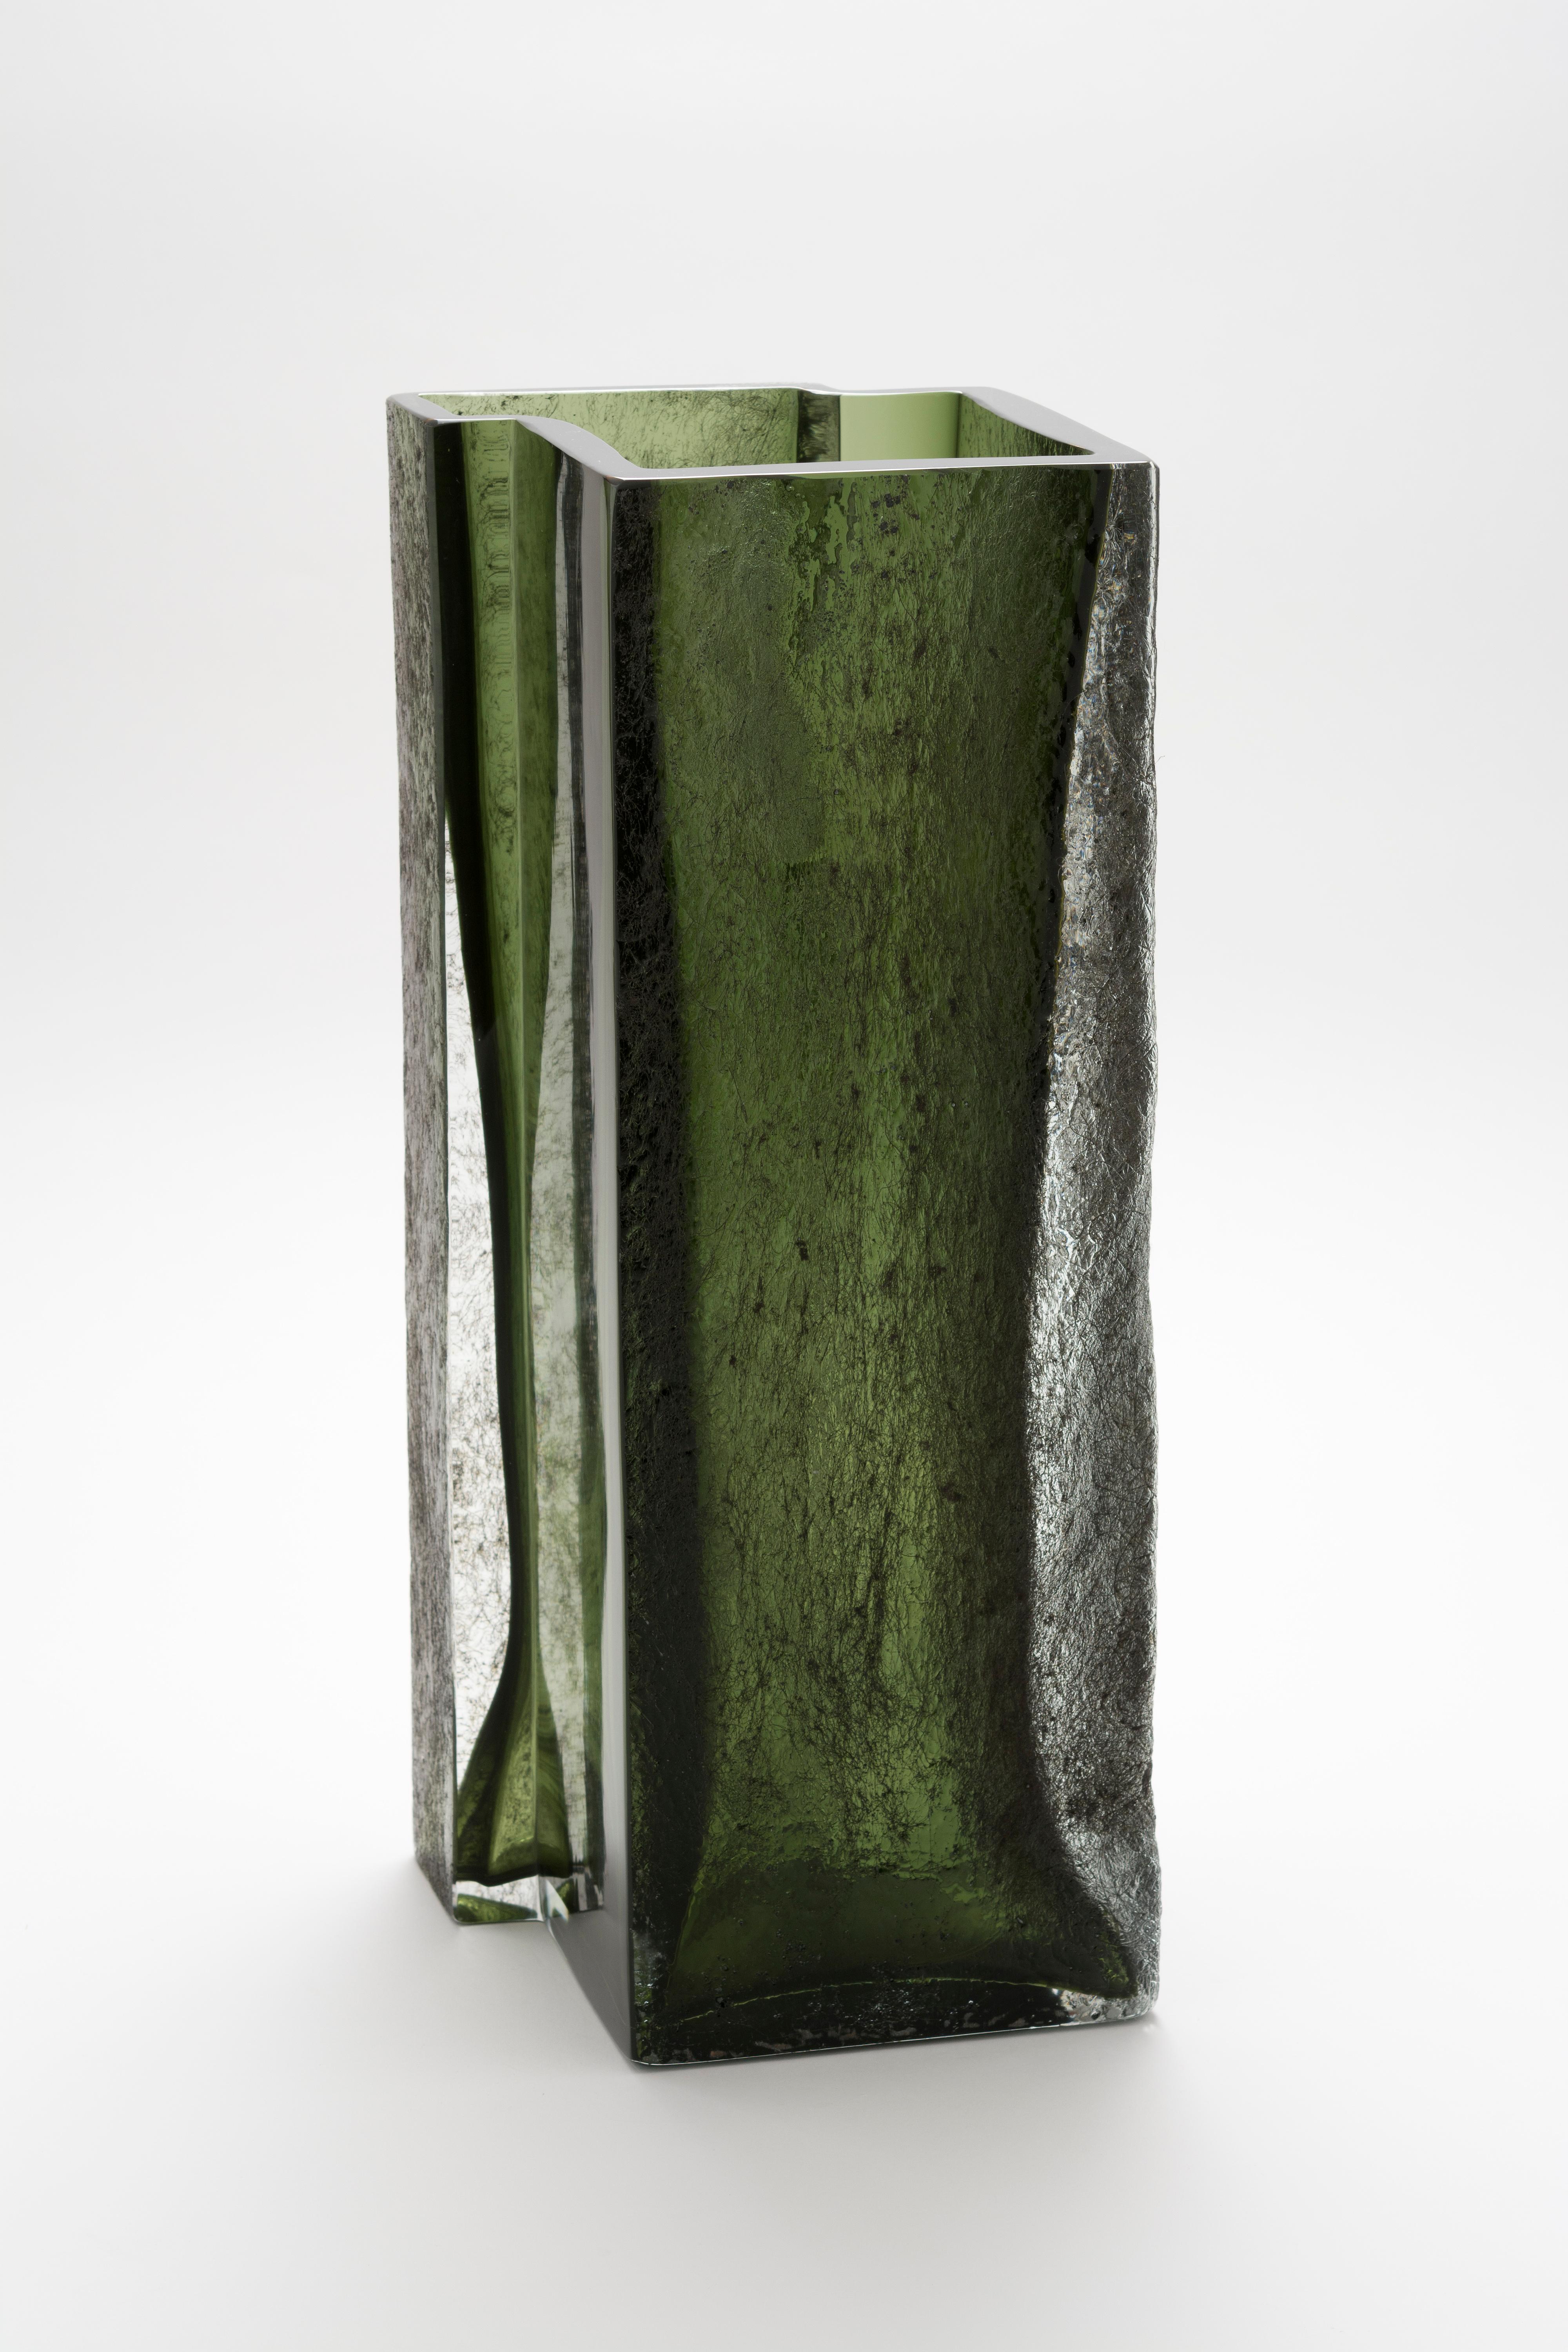 Surrounded by green vase by Paolo Marcolongo
Dimensions: 42.5 x 16.5 x H 16.3 cm 
Materials: Murano Glass and Iron. 


Paolo Marcolongo was born in Padua in 1956, he attended the Art High School 